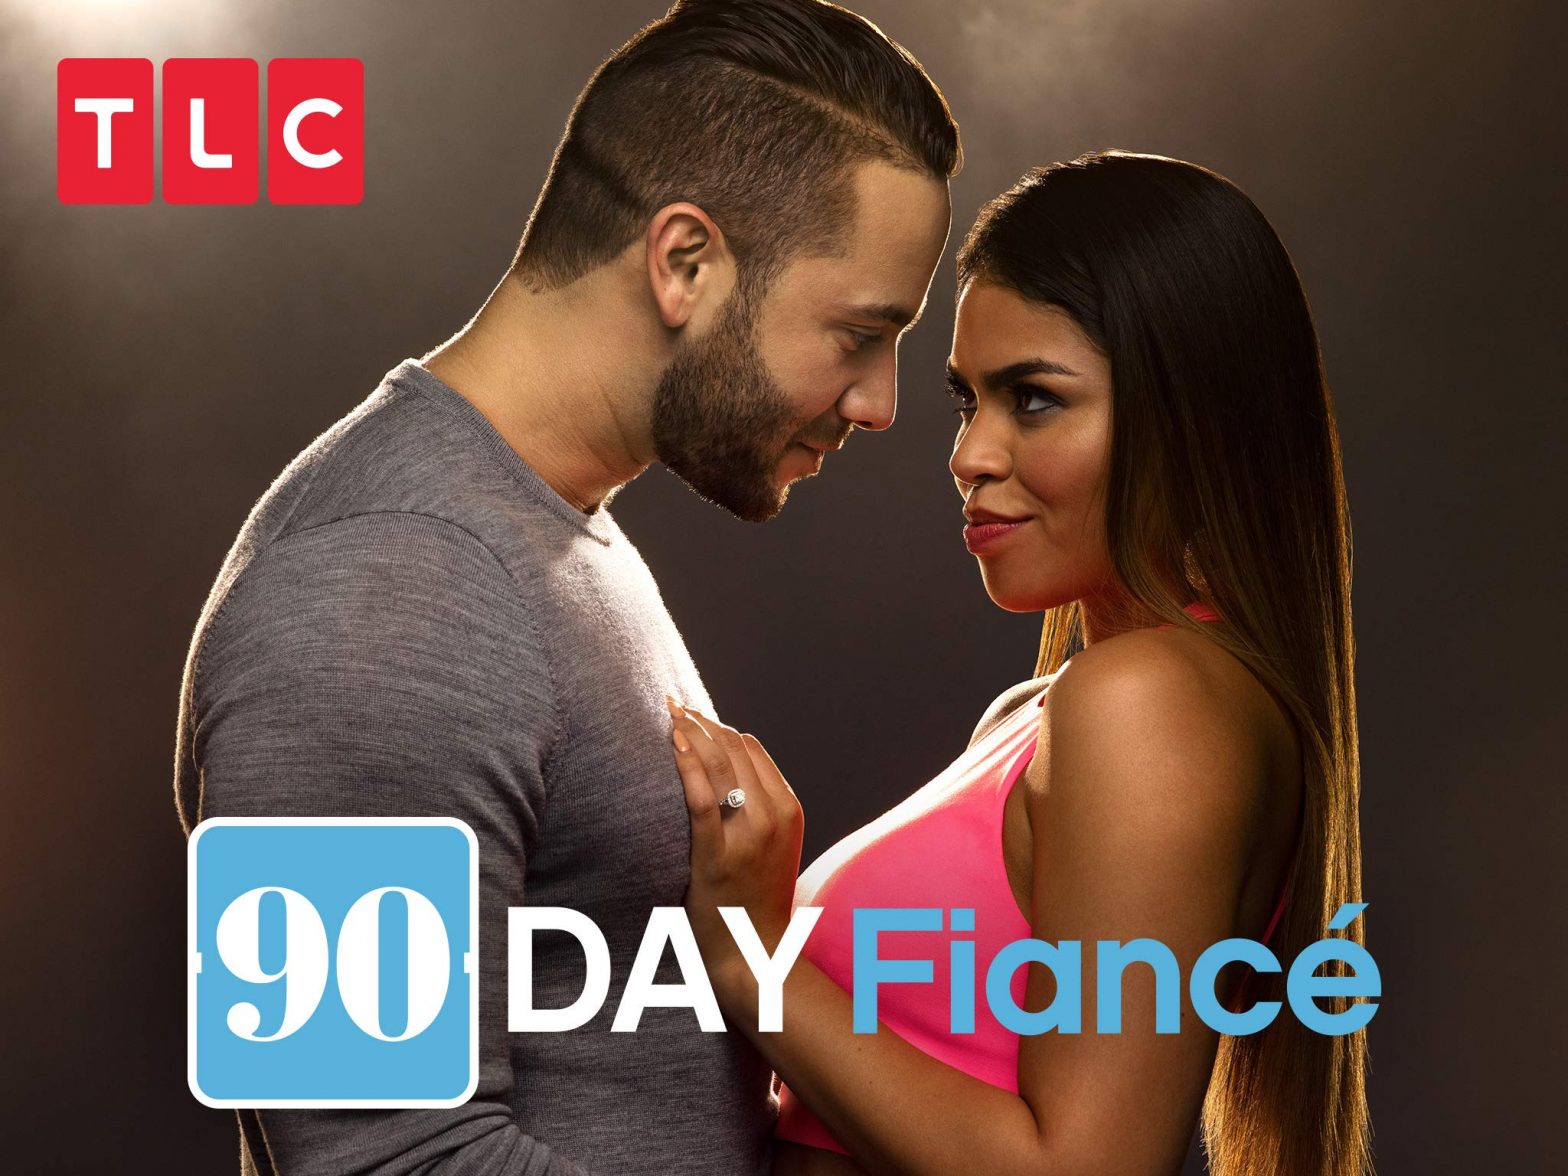 Where to watch 90 Day Fiancé without cable for free 2022